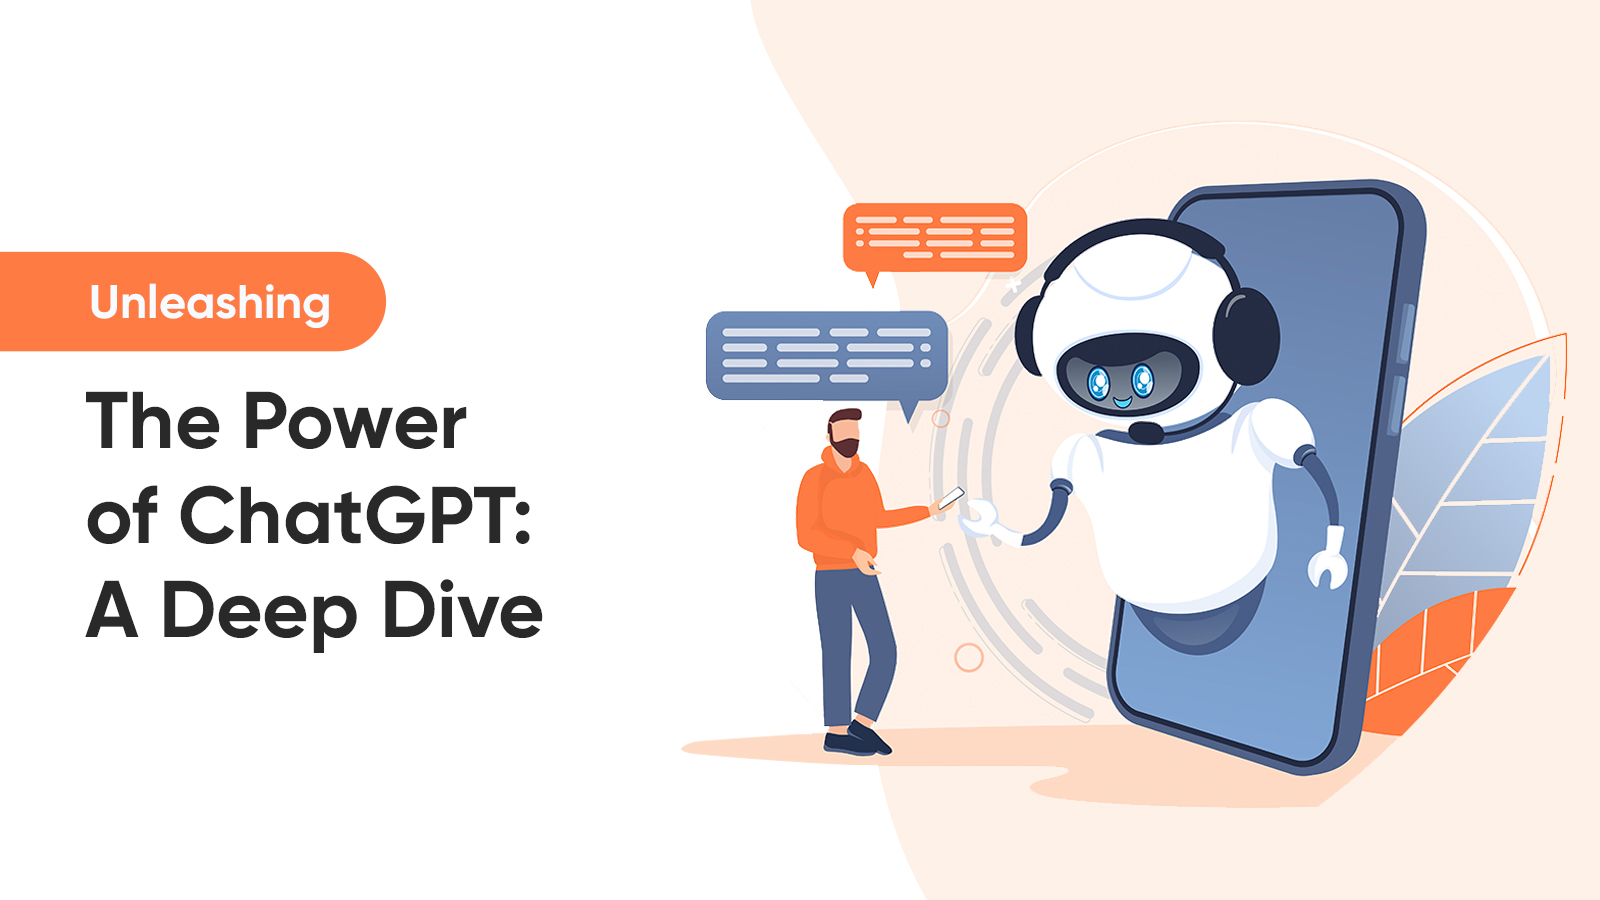 Unleashing the Power of AI: A Deep Dive into ChatGPT